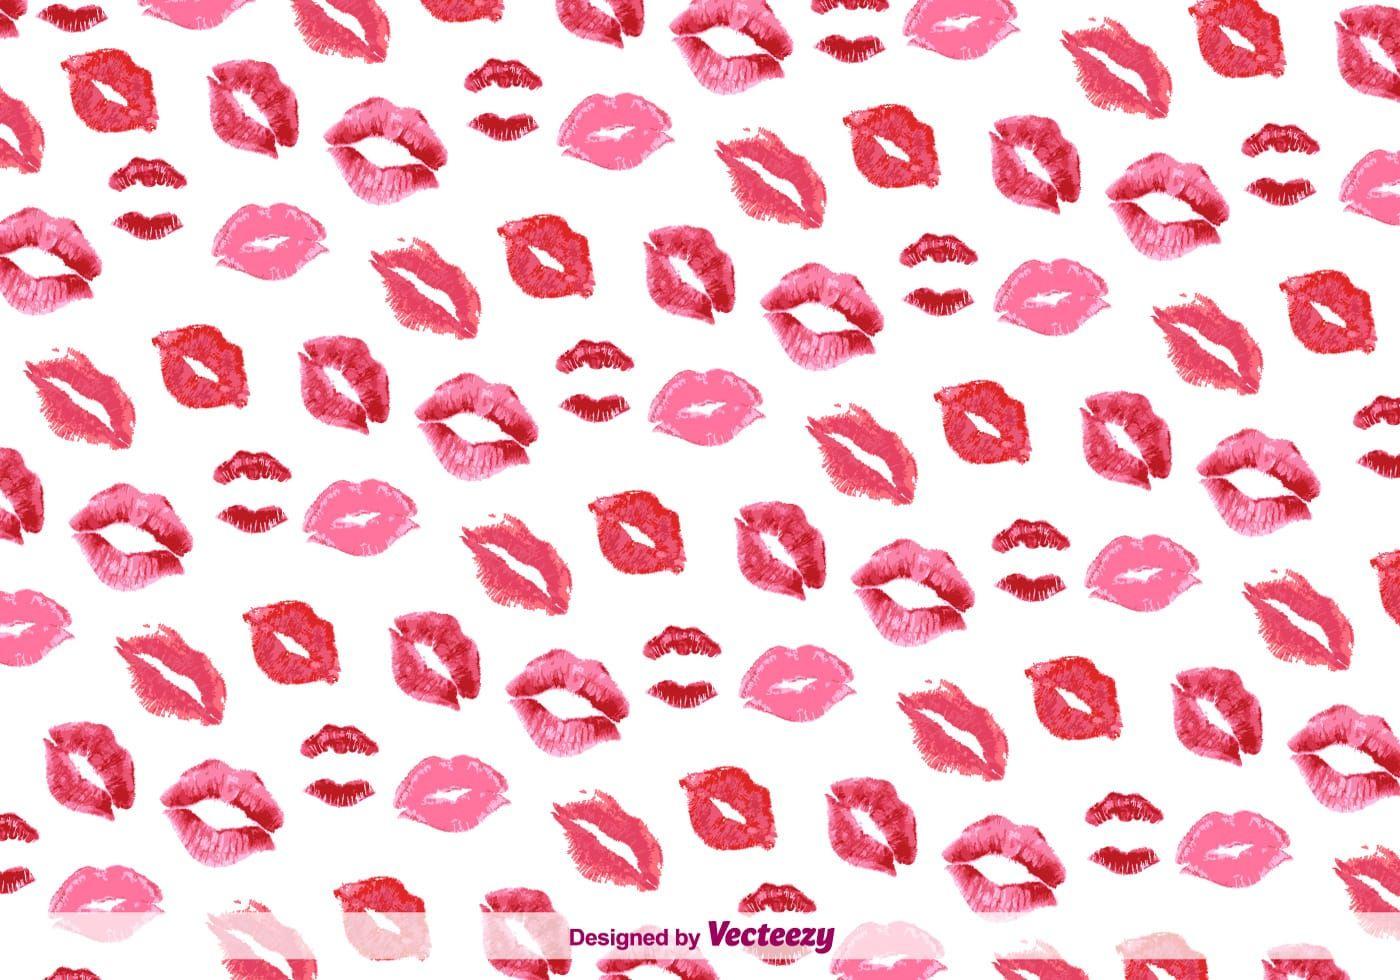 Kiss Background Pattern Vector Free Vector Art, Stock